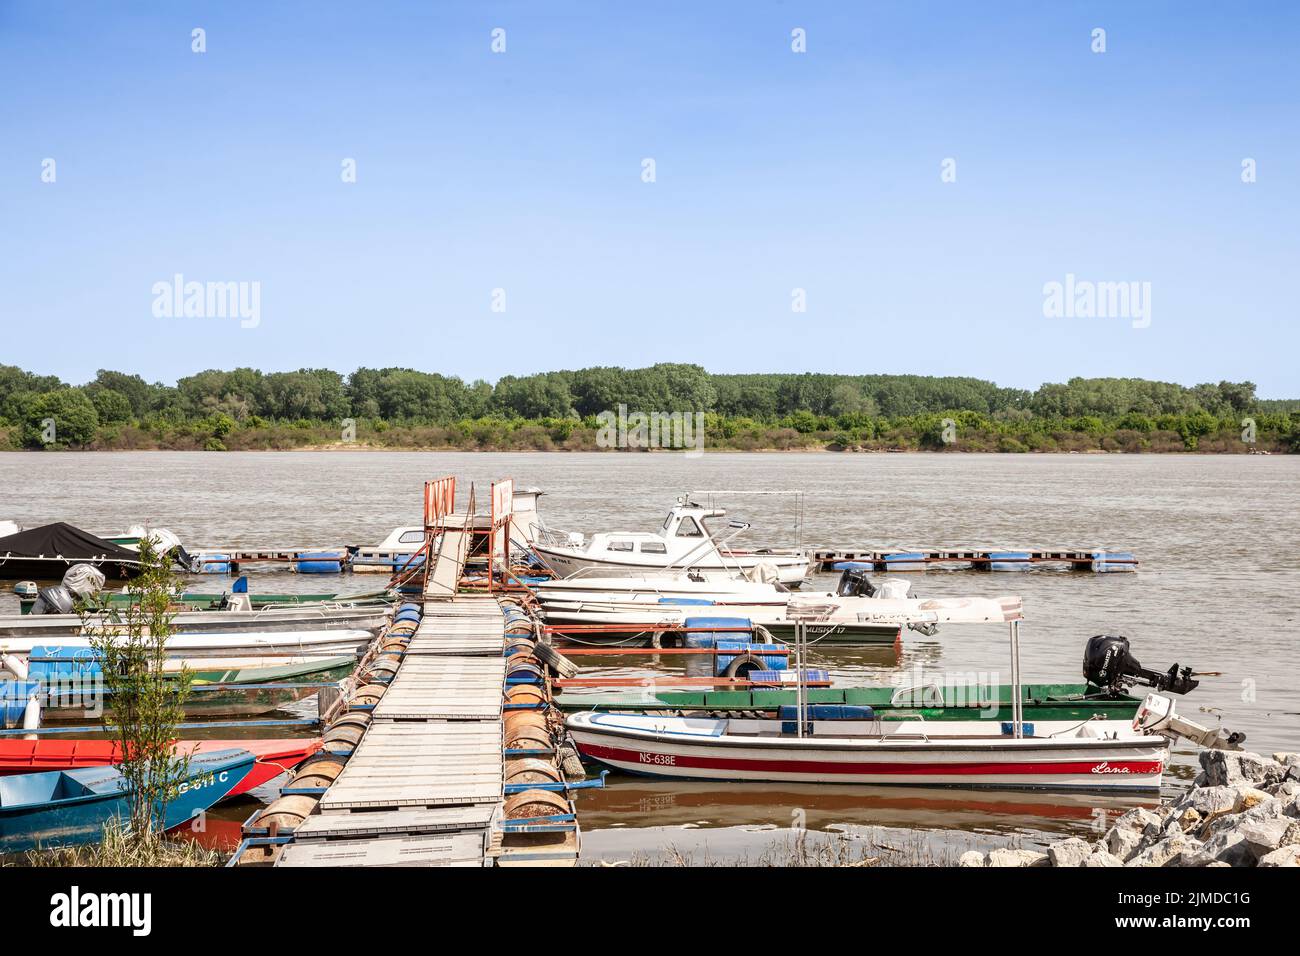 Picture of boats of various sizes on Danube river in the afternoon in Novi Banovci Serbia, during spring Stock Photo